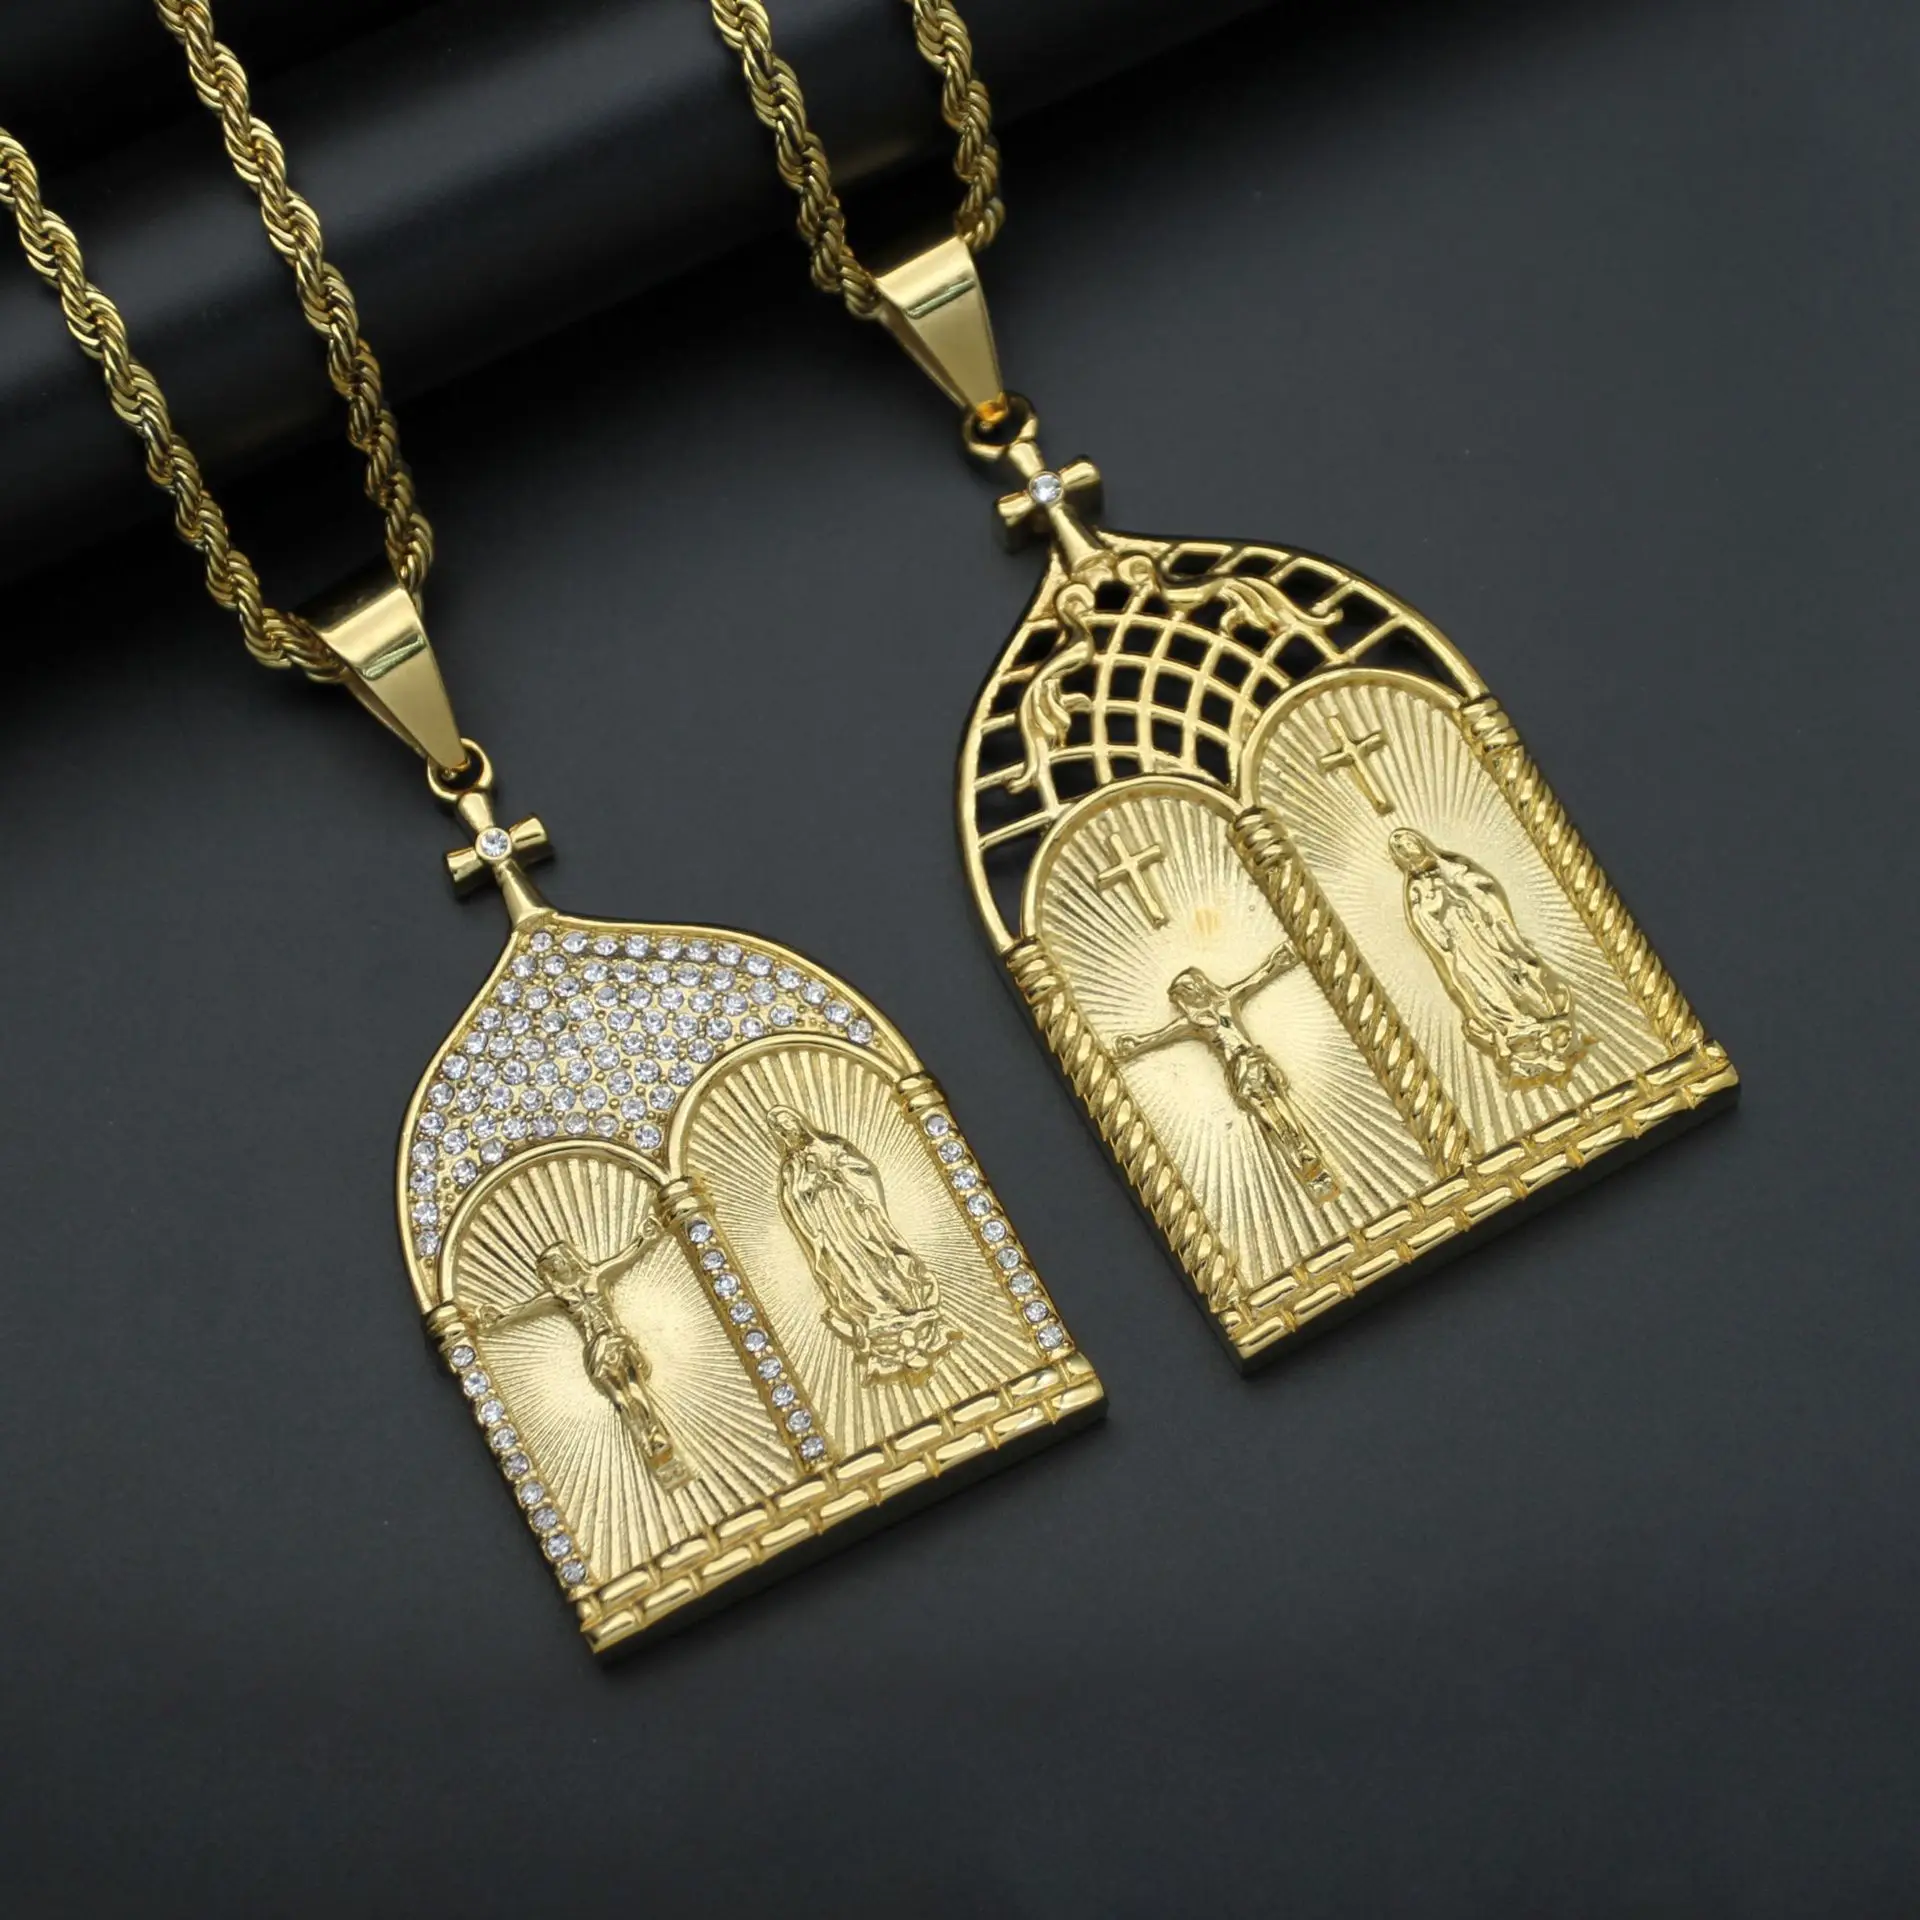 

Hiphop Crucifix Virgin Mary Pendant & Chain Iced Out Gold Color Jesus Cross Necklace For Women Men Religious Christian Jewelry